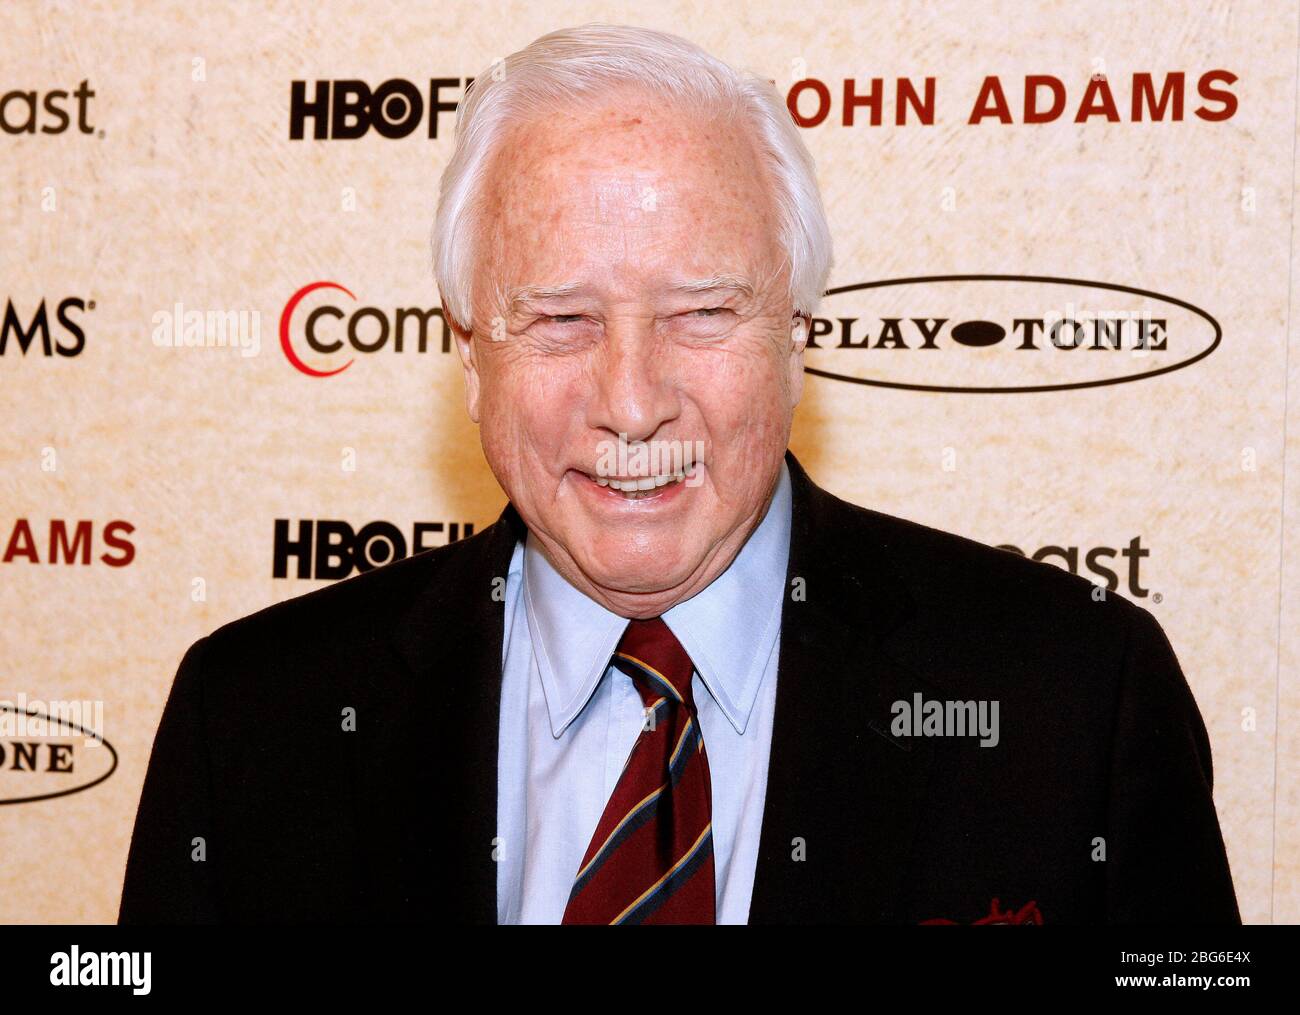 David McCullough, author of the book John Adams is pictured at the screening of John Adams at the National Constitution Center in Philadelphia on March 11, 2008. Credit: Scott Weiner/MediaPunch Stock Photo